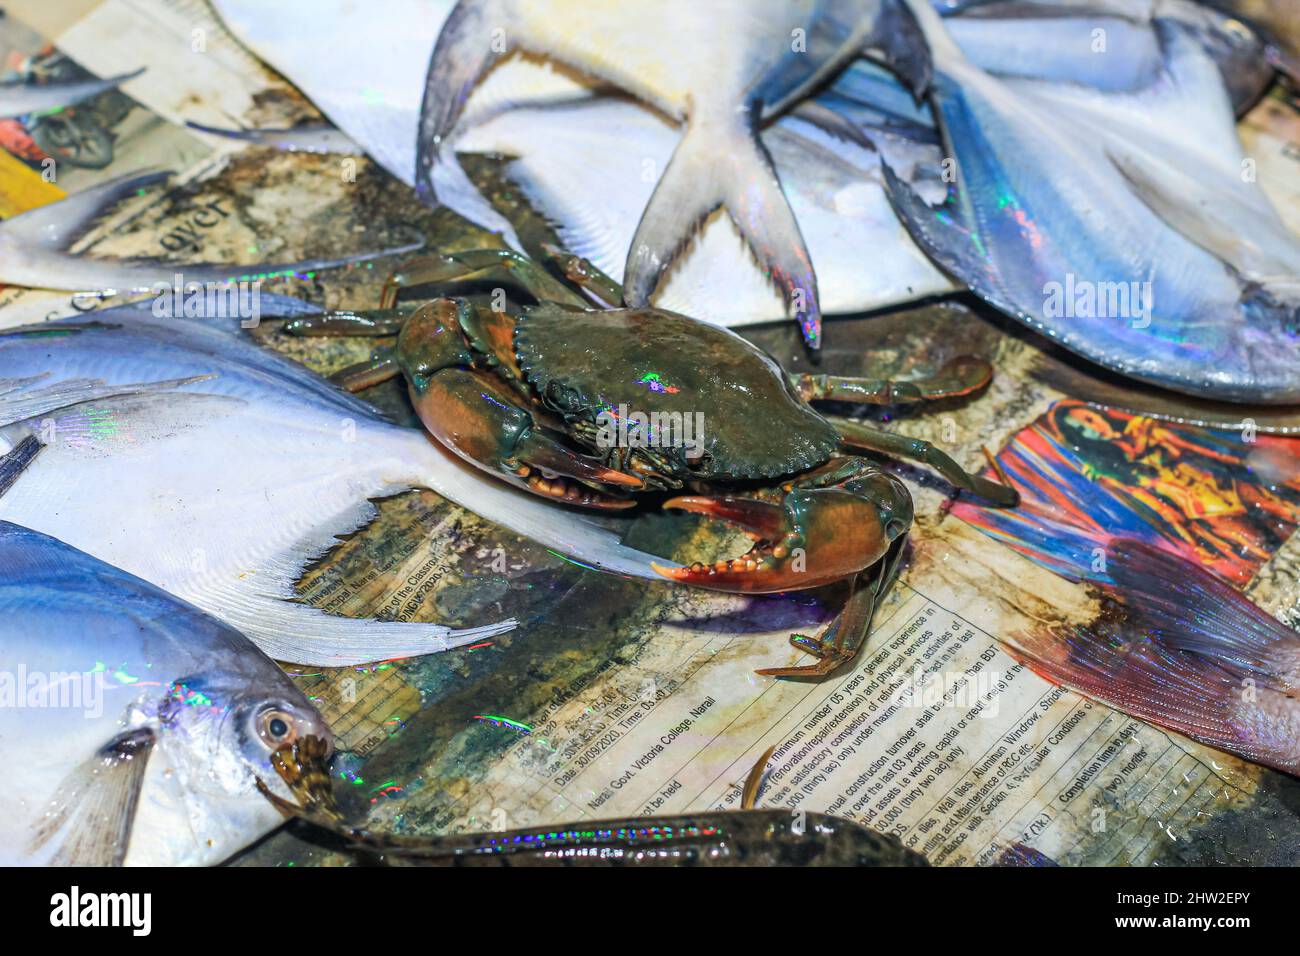 Giant mud crab on a tray. Closeup fresh bubble crab (Scylla Serrata) Common name Black Crab, Mangrove Crab Rows of crabs tied with straw are sold. Stock Photo